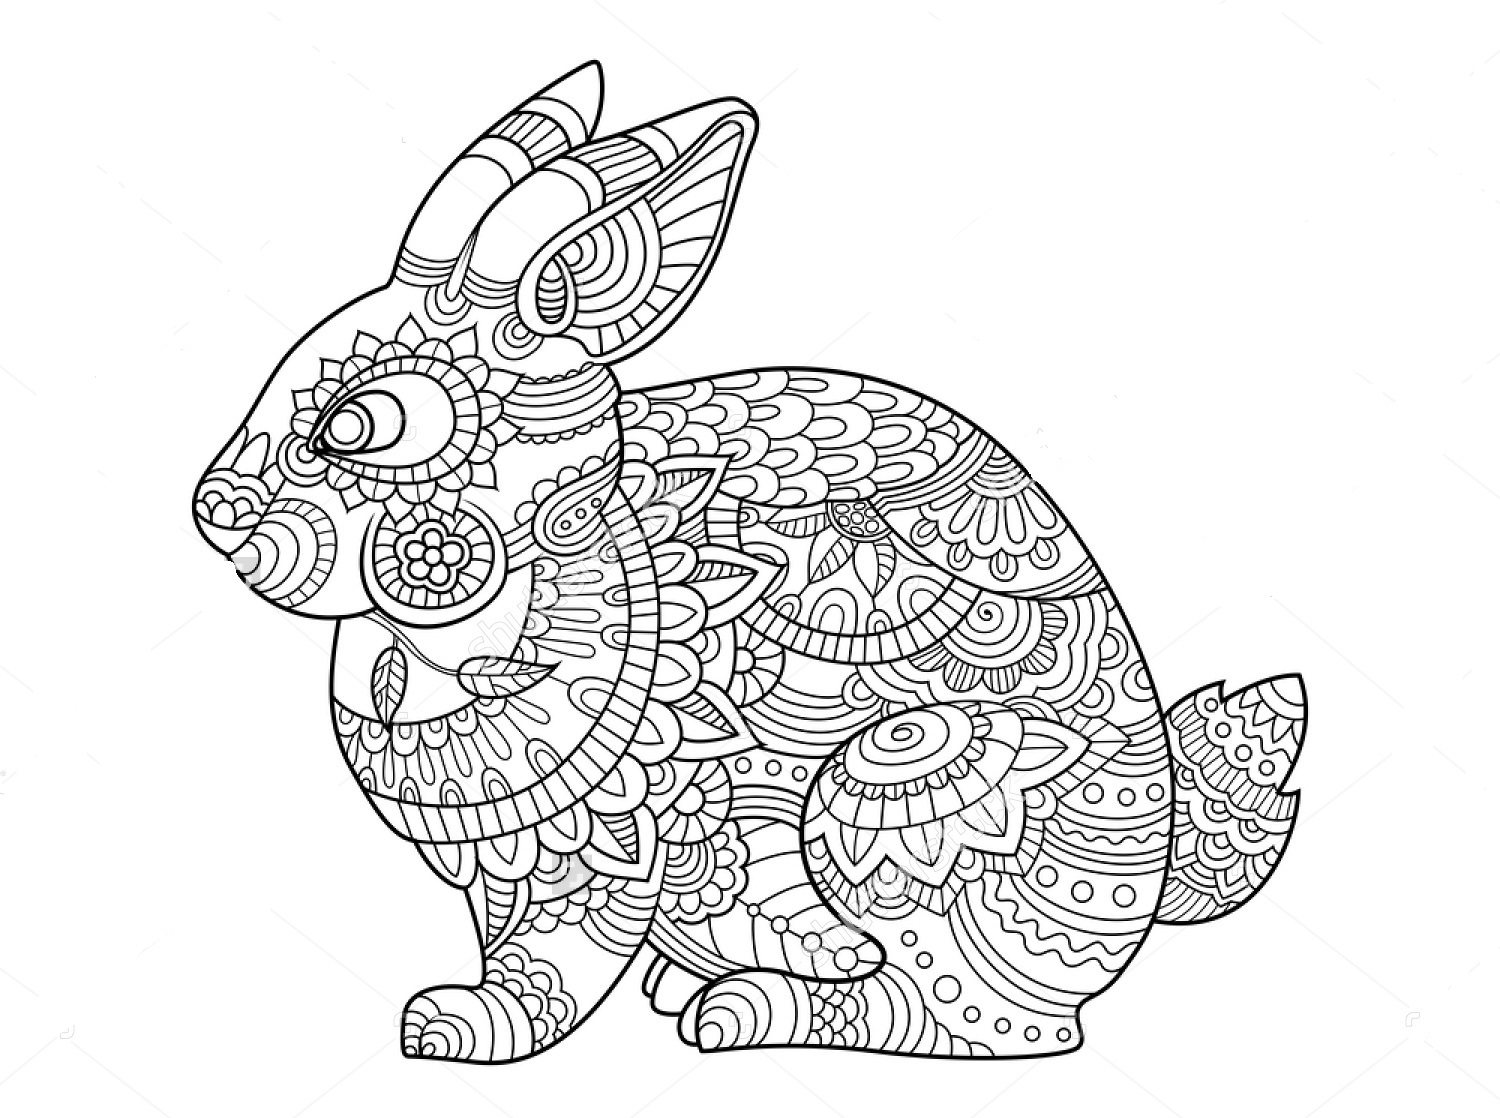 Free Rabbit Coloring Pages Awesome Rabbit Zentangle Coloring Page Art Pinterest Free Coloring